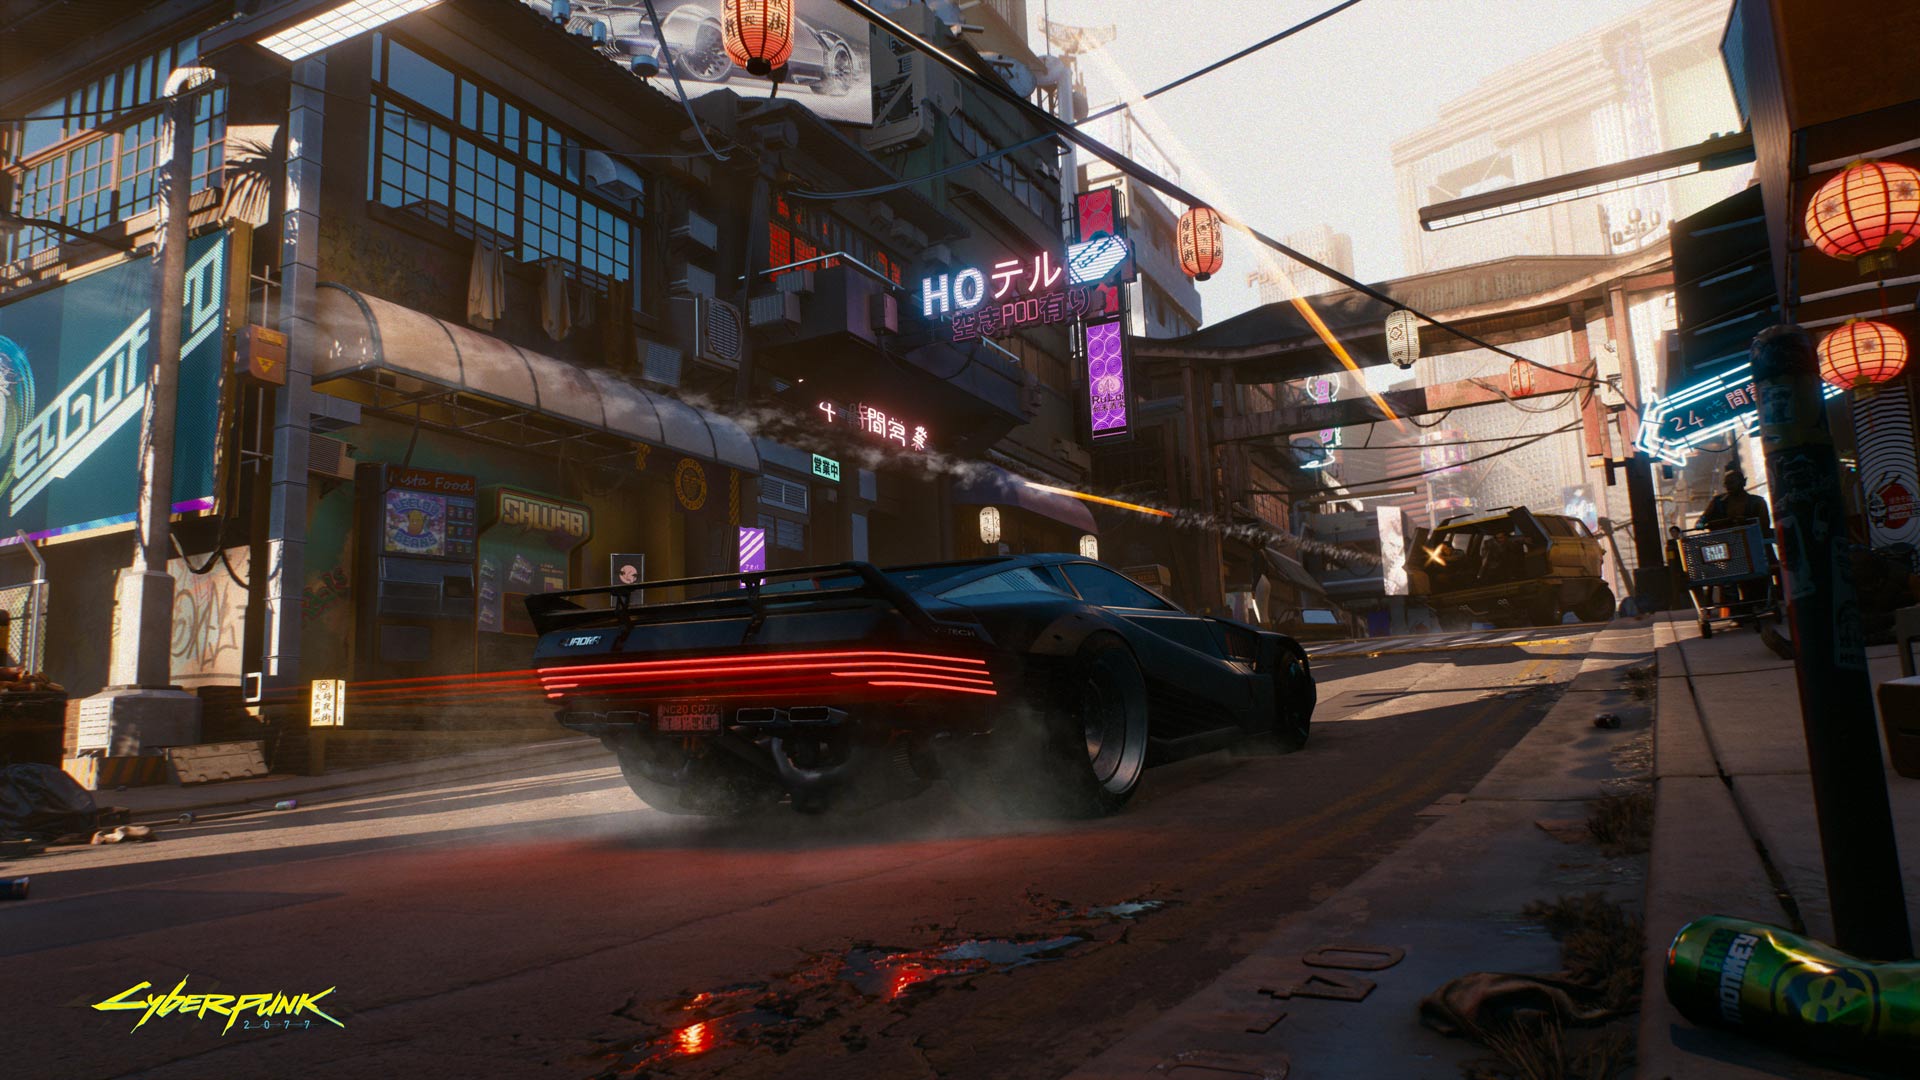 Cyberpunk 2077 From The Creators Of The Witcher 3 Wild Hunt